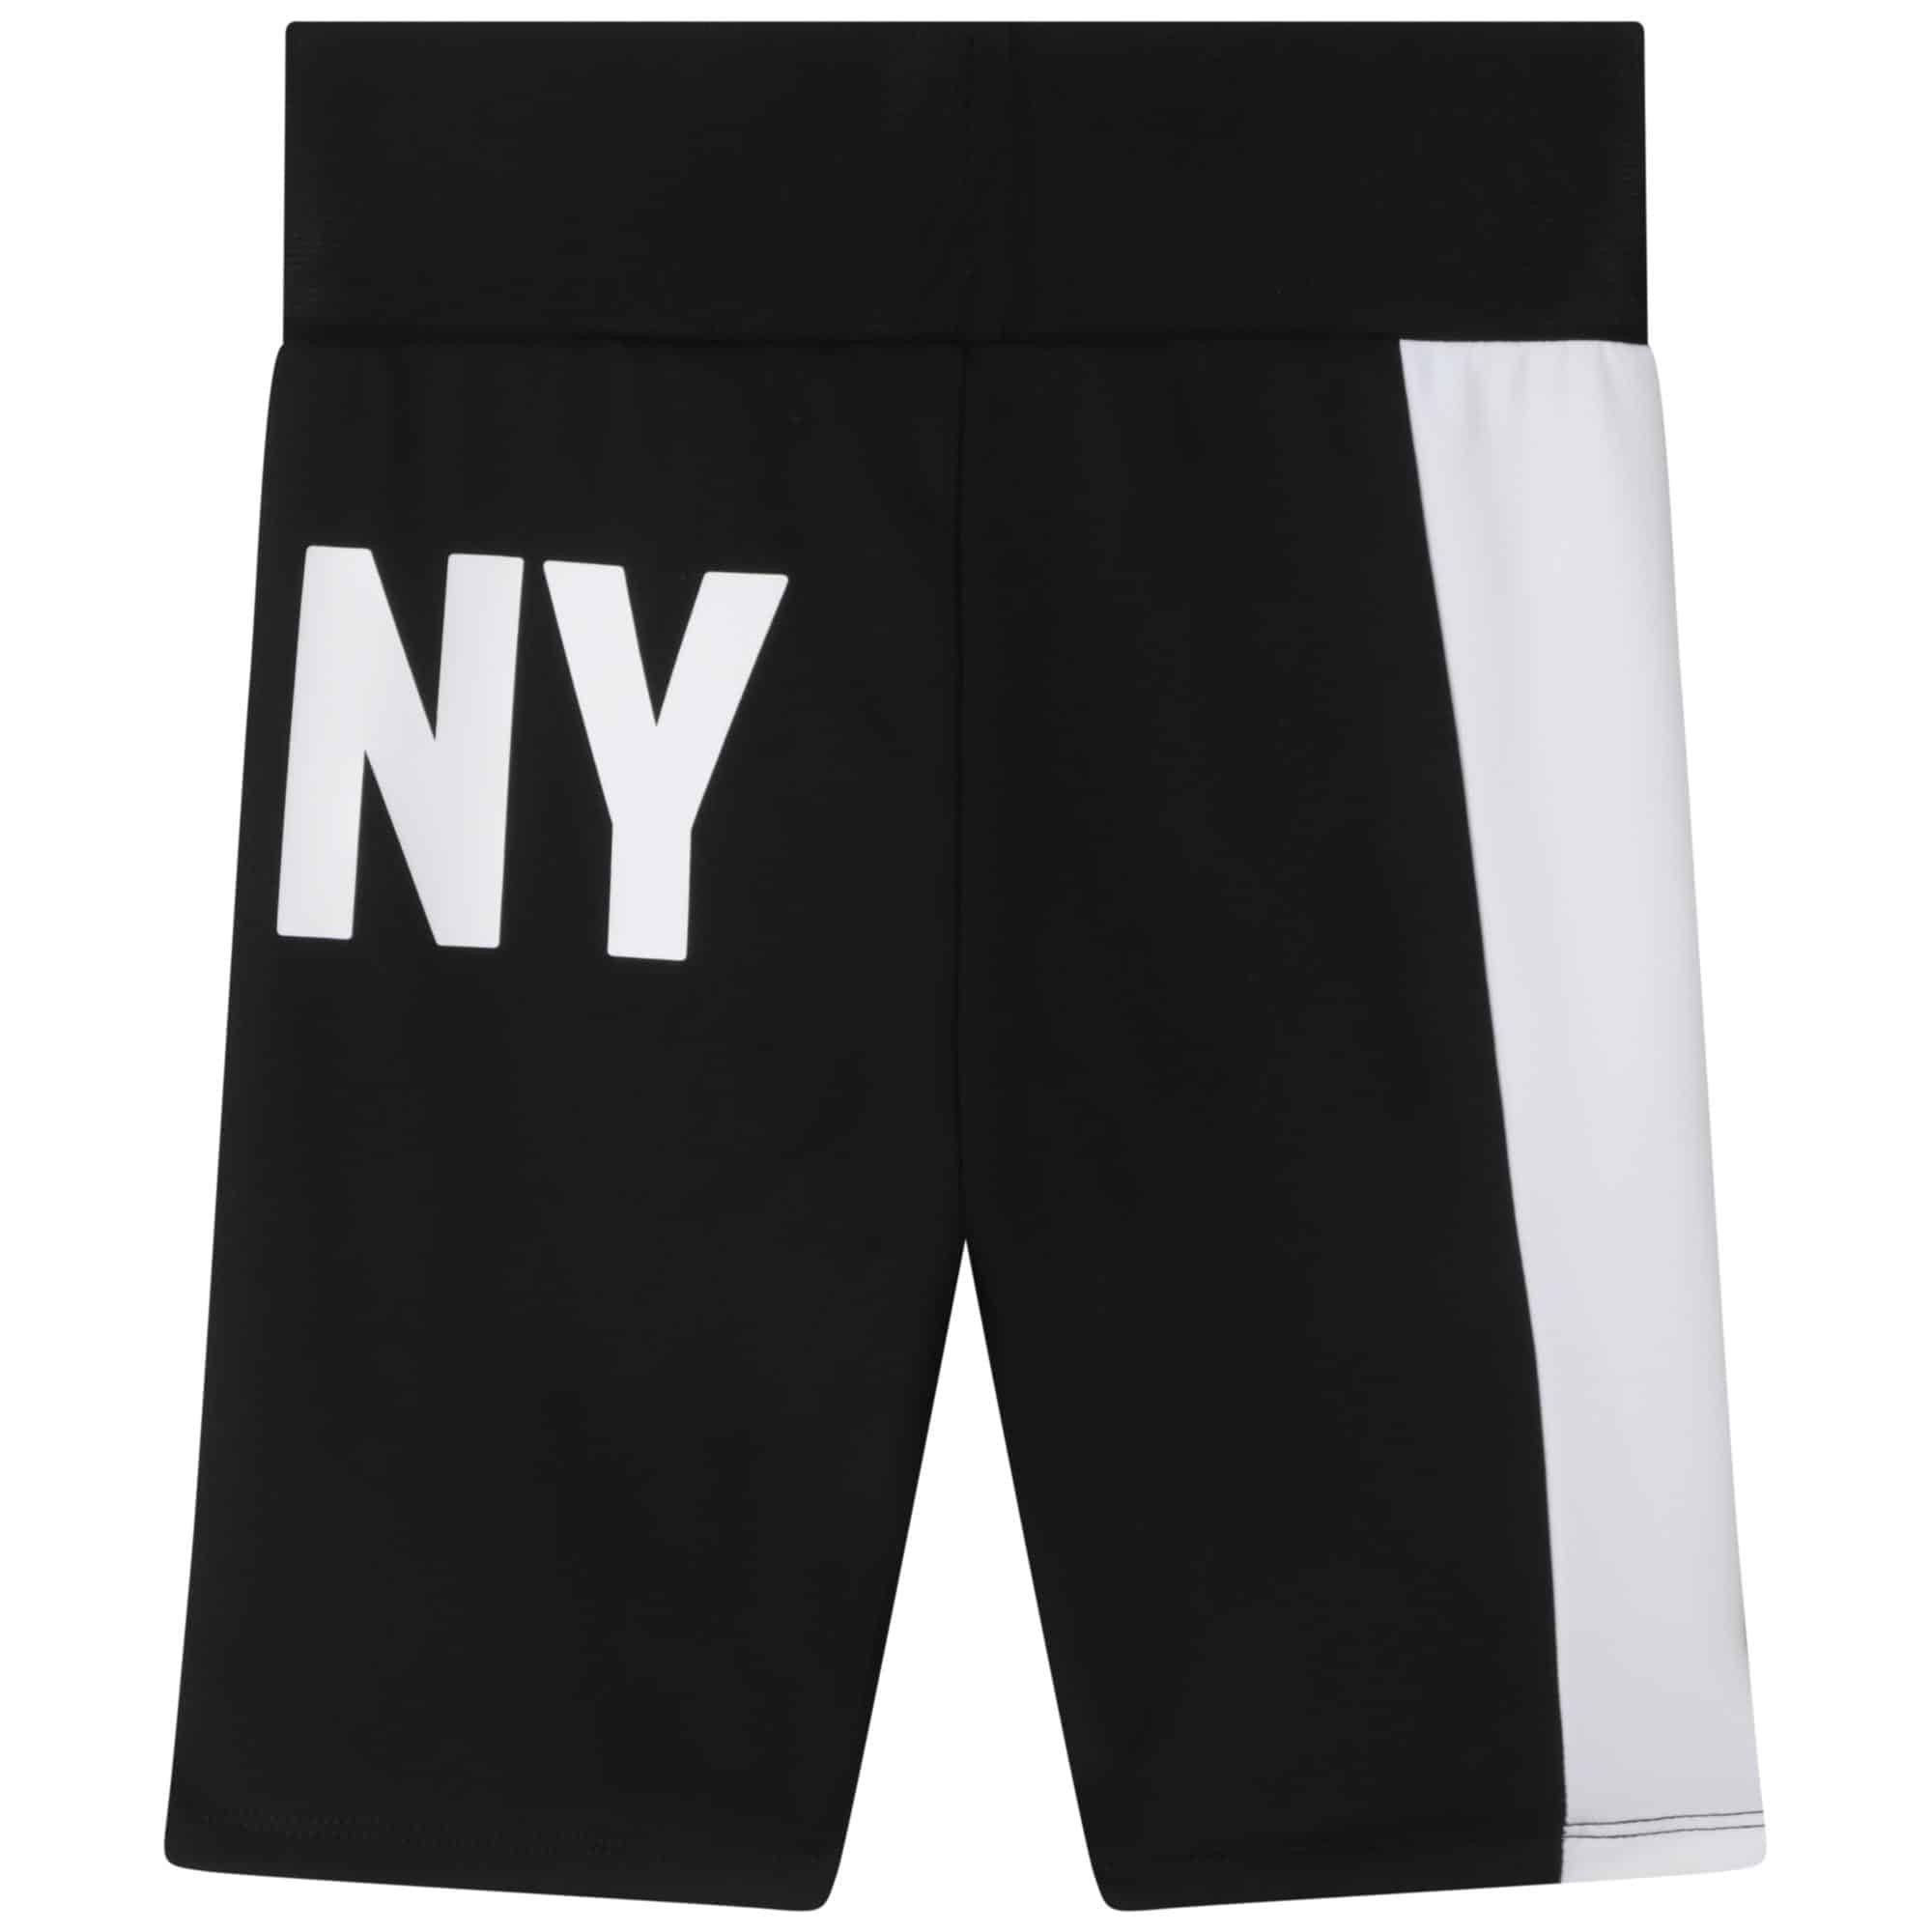 DKNY girls black and white cycling shorts back view